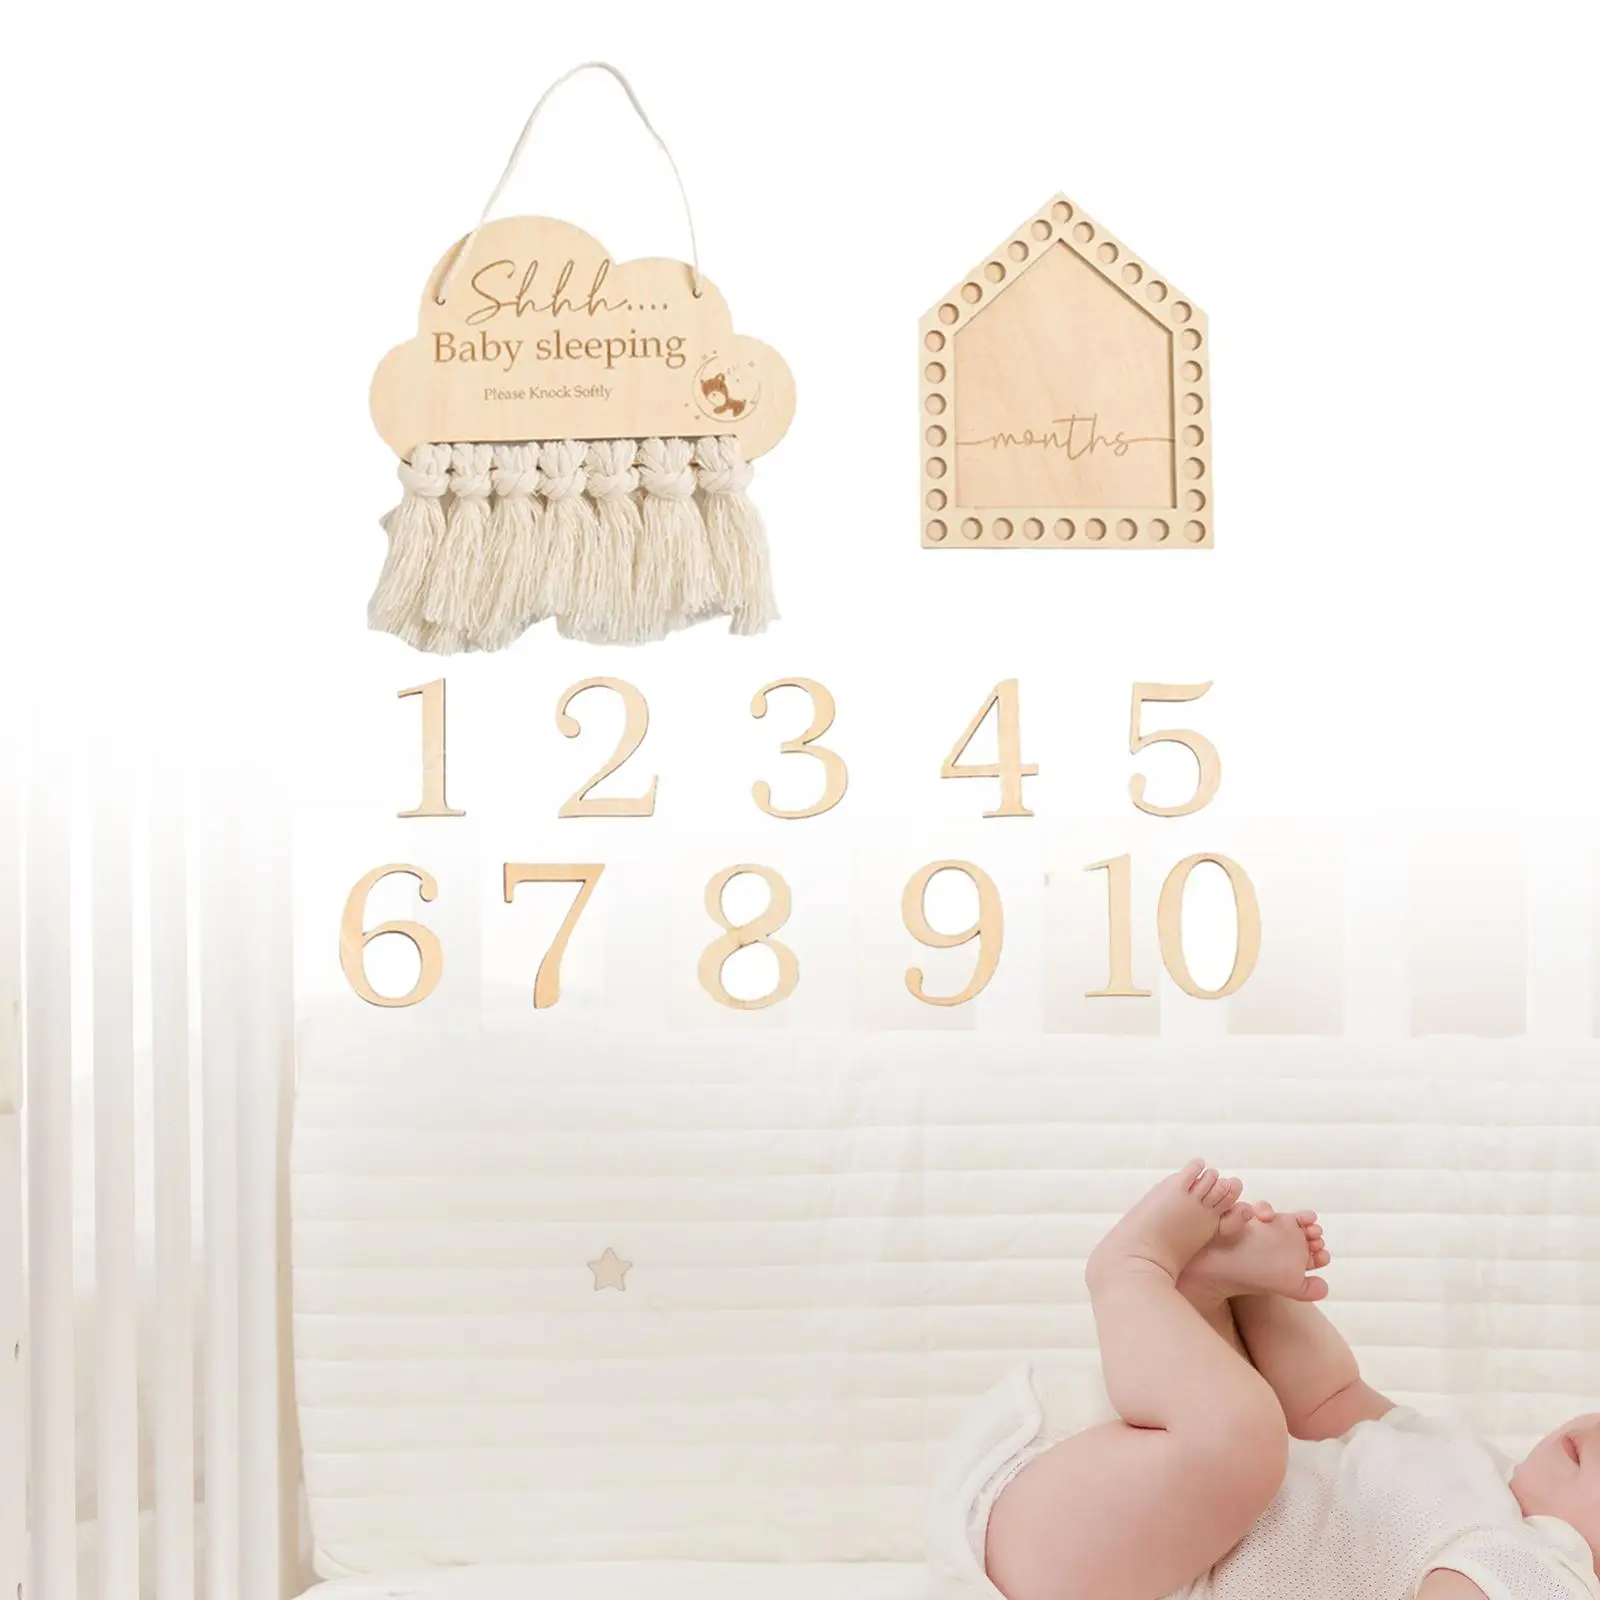 Beautiful Wooden Baby Milestone Cards Newborn Photoshoot Props Conception Gift Growth